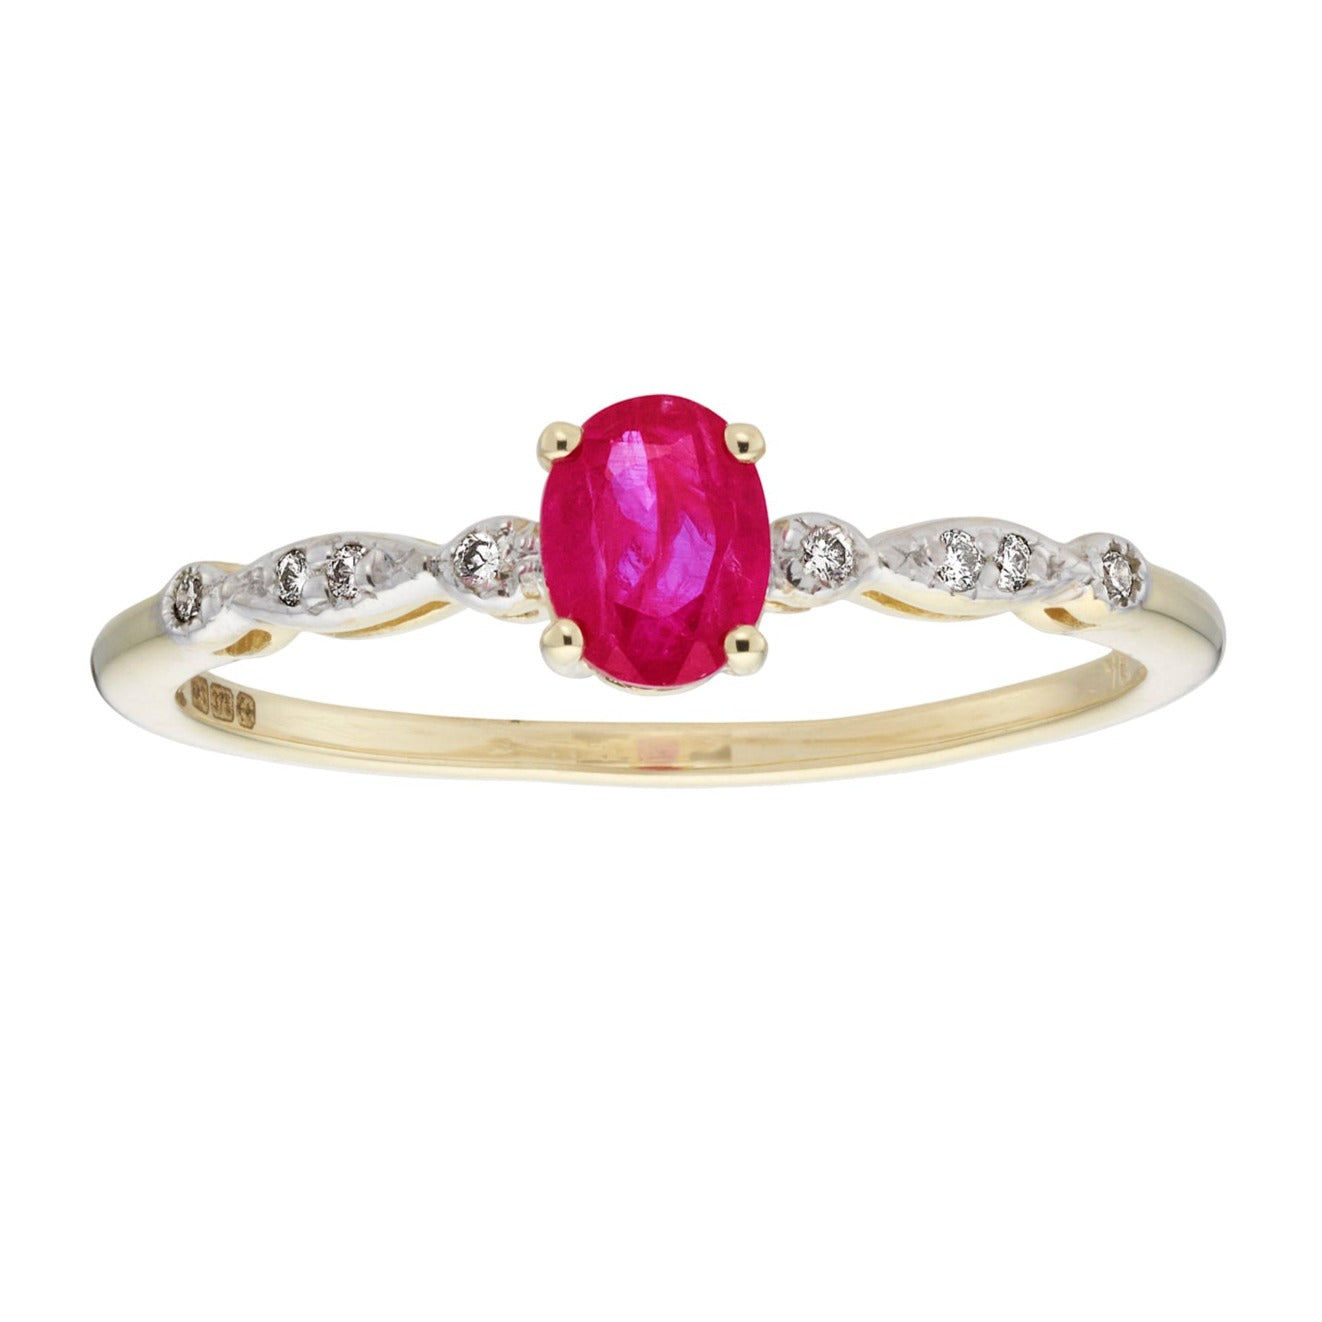 9ct gold 5x4mm oval ruby & diamond ring 0.04ct